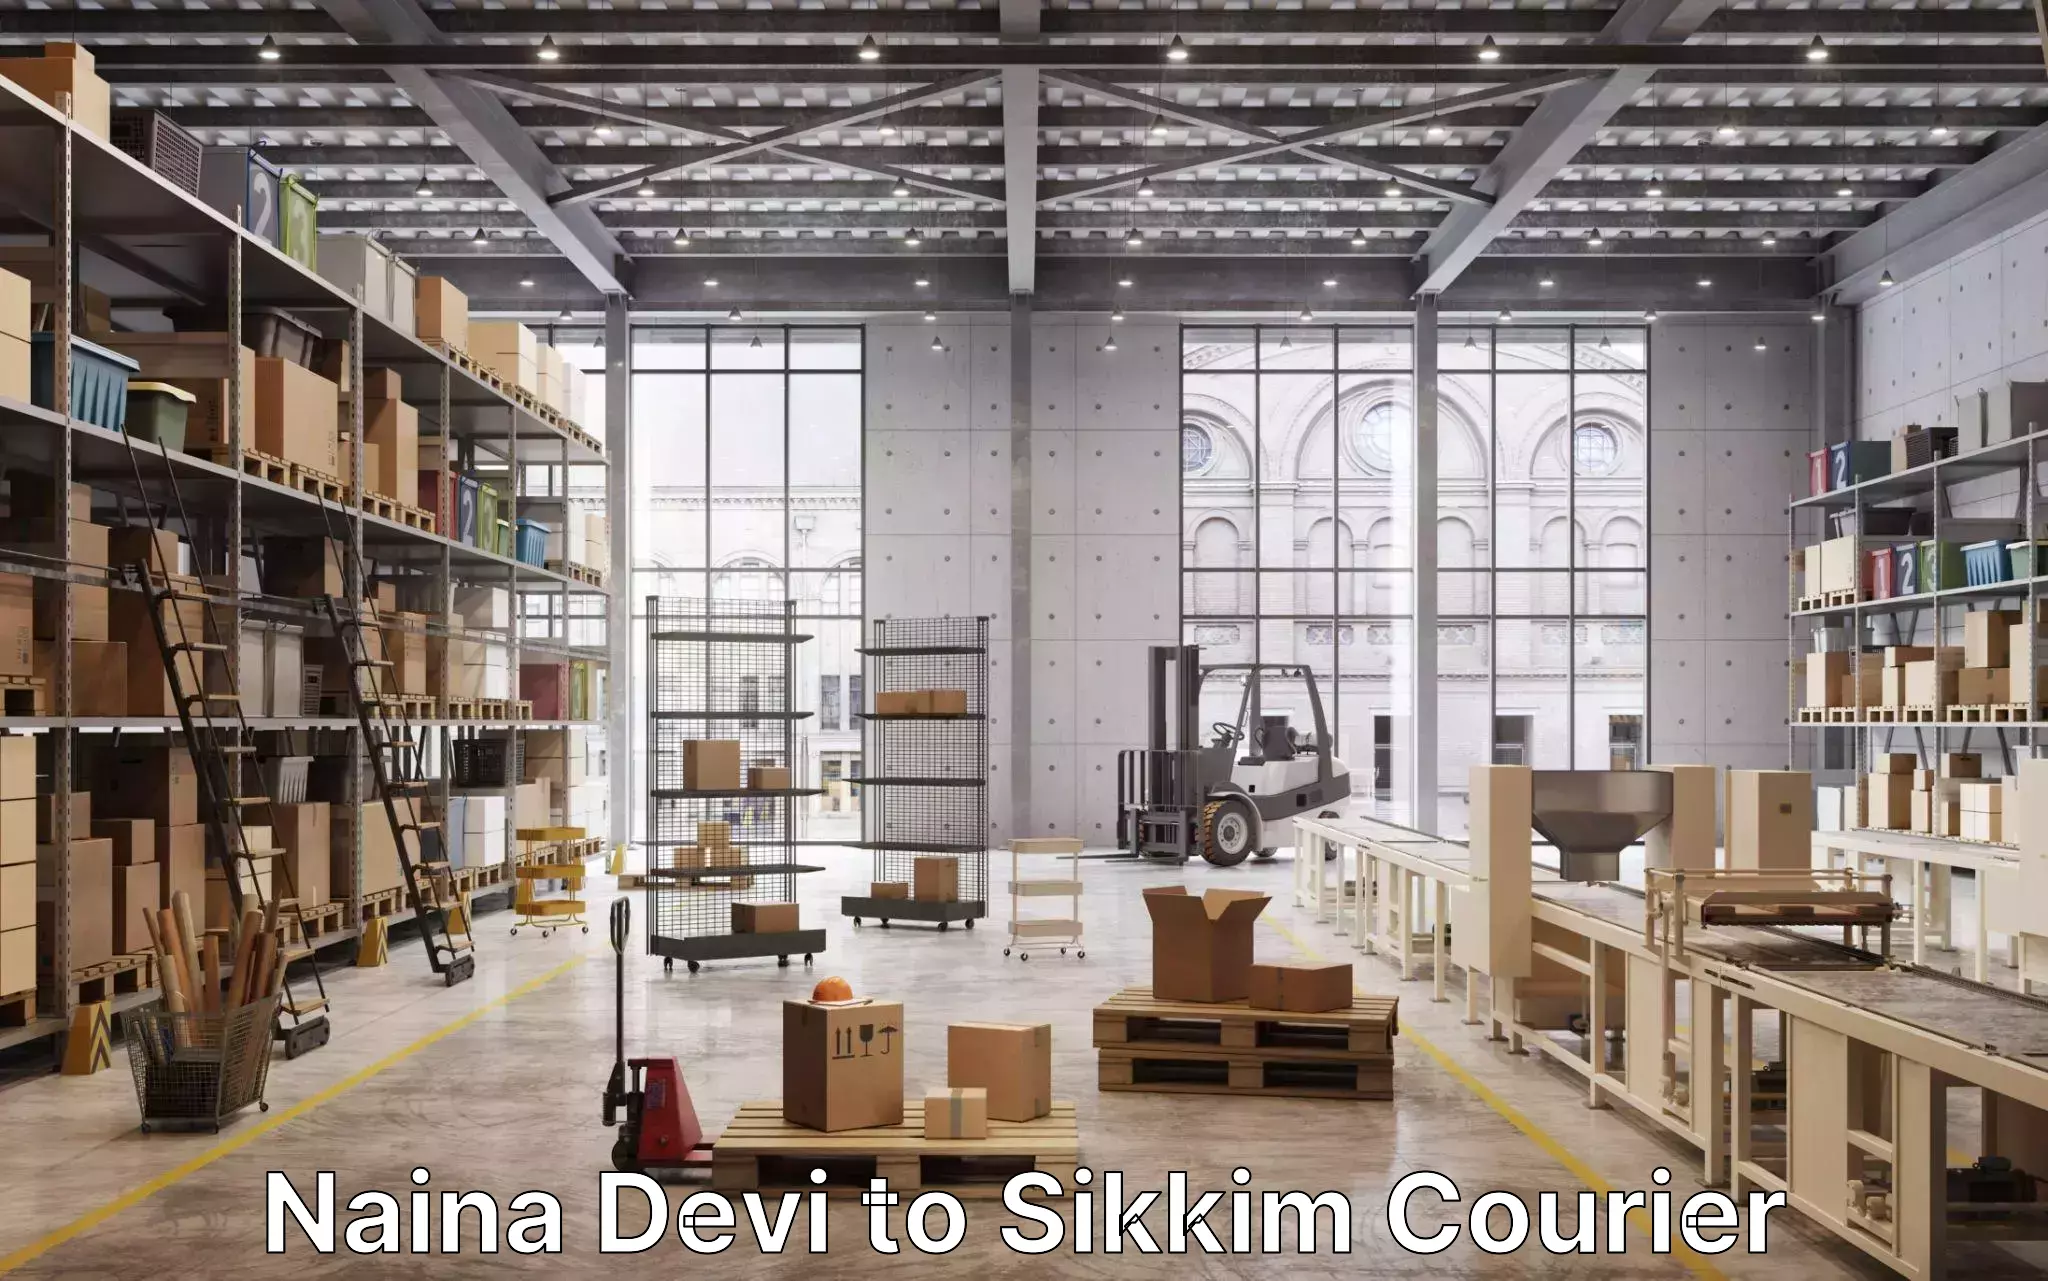 Furniture transport specialists Naina Devi to Sikkim